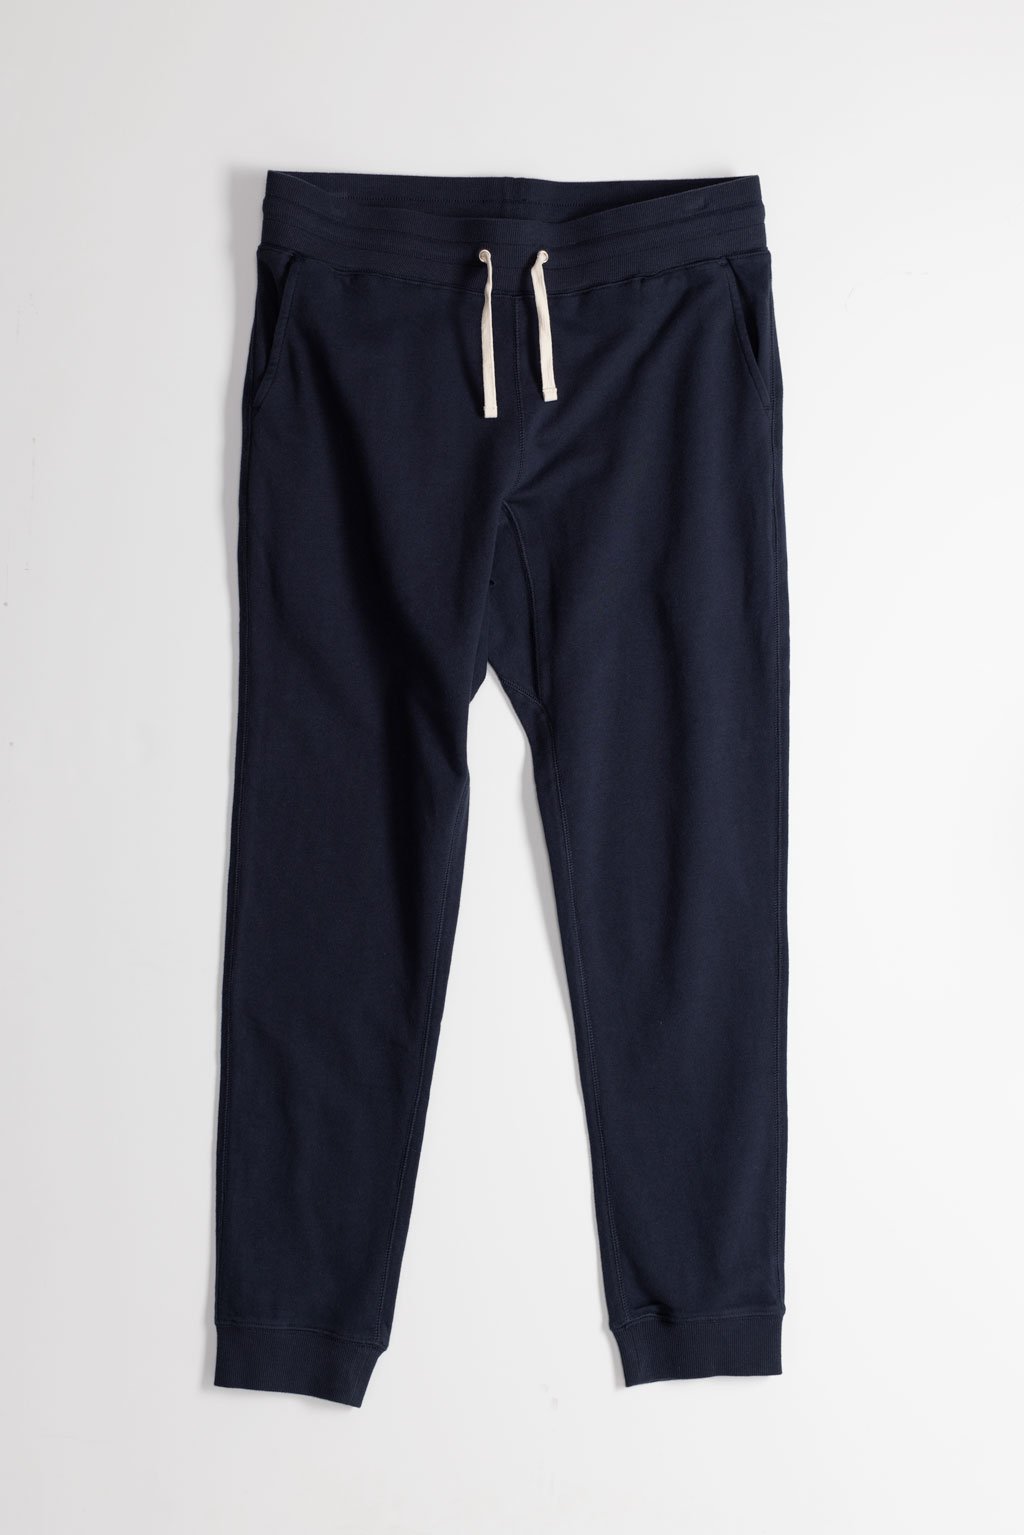 NS2167-2 250g French Terry Sweatpants in Navy 01